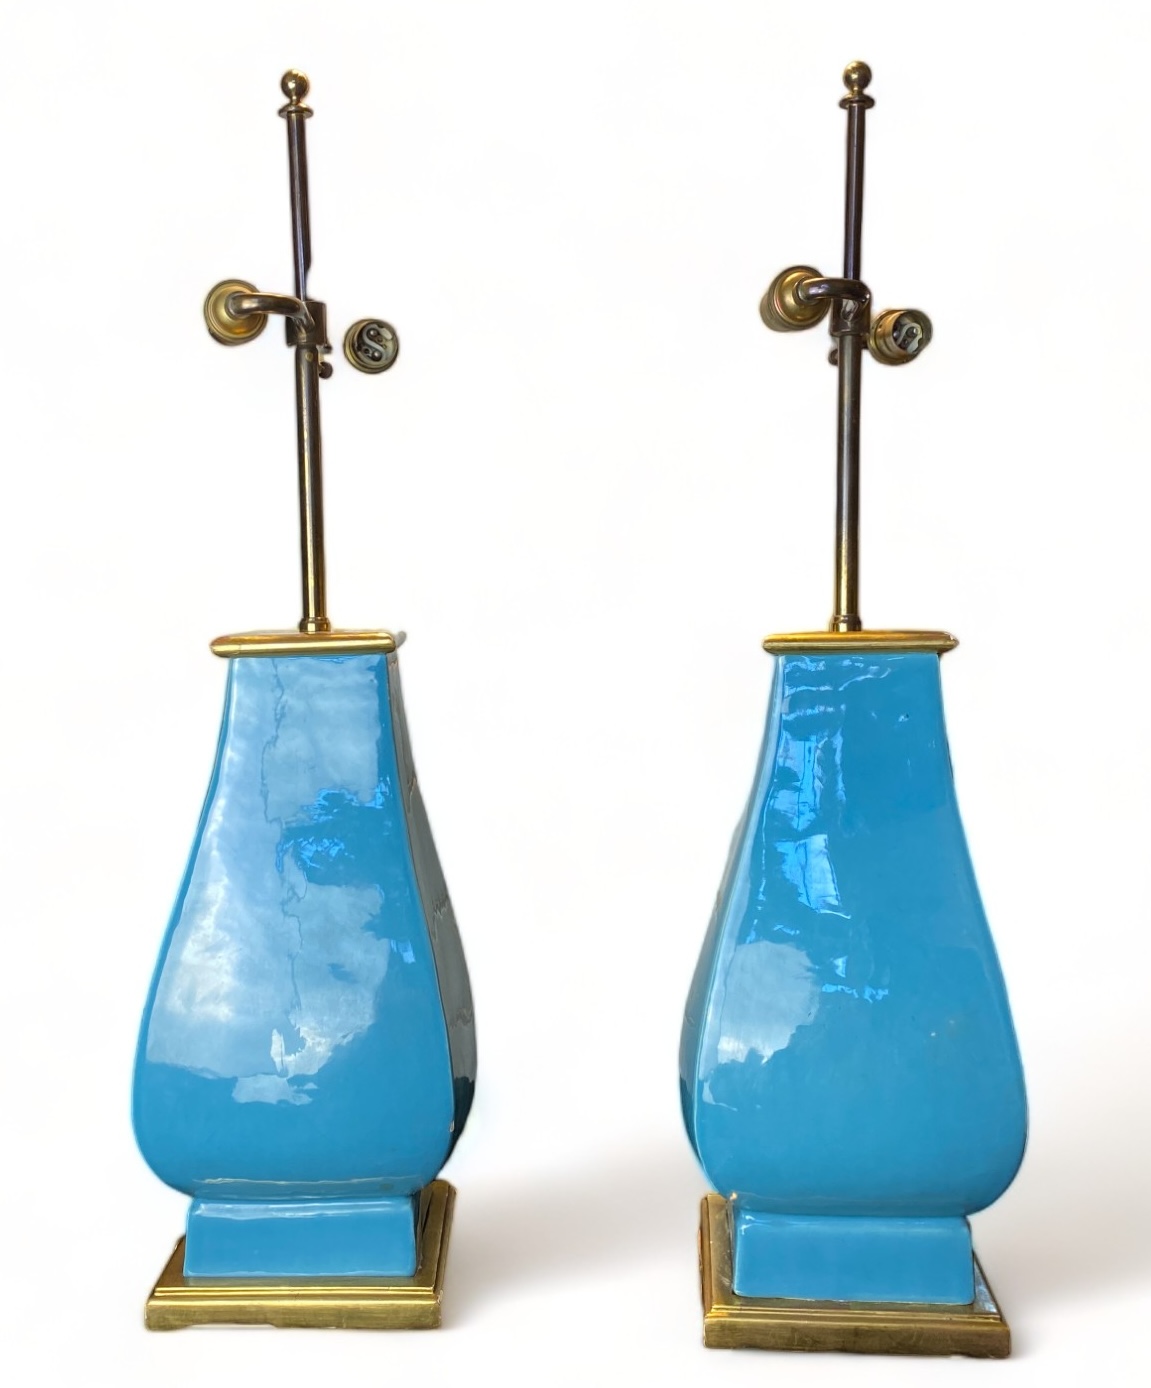 A pair of Mallets 20th century light blue ceramic twin-light table lamps - Image 5 of 6